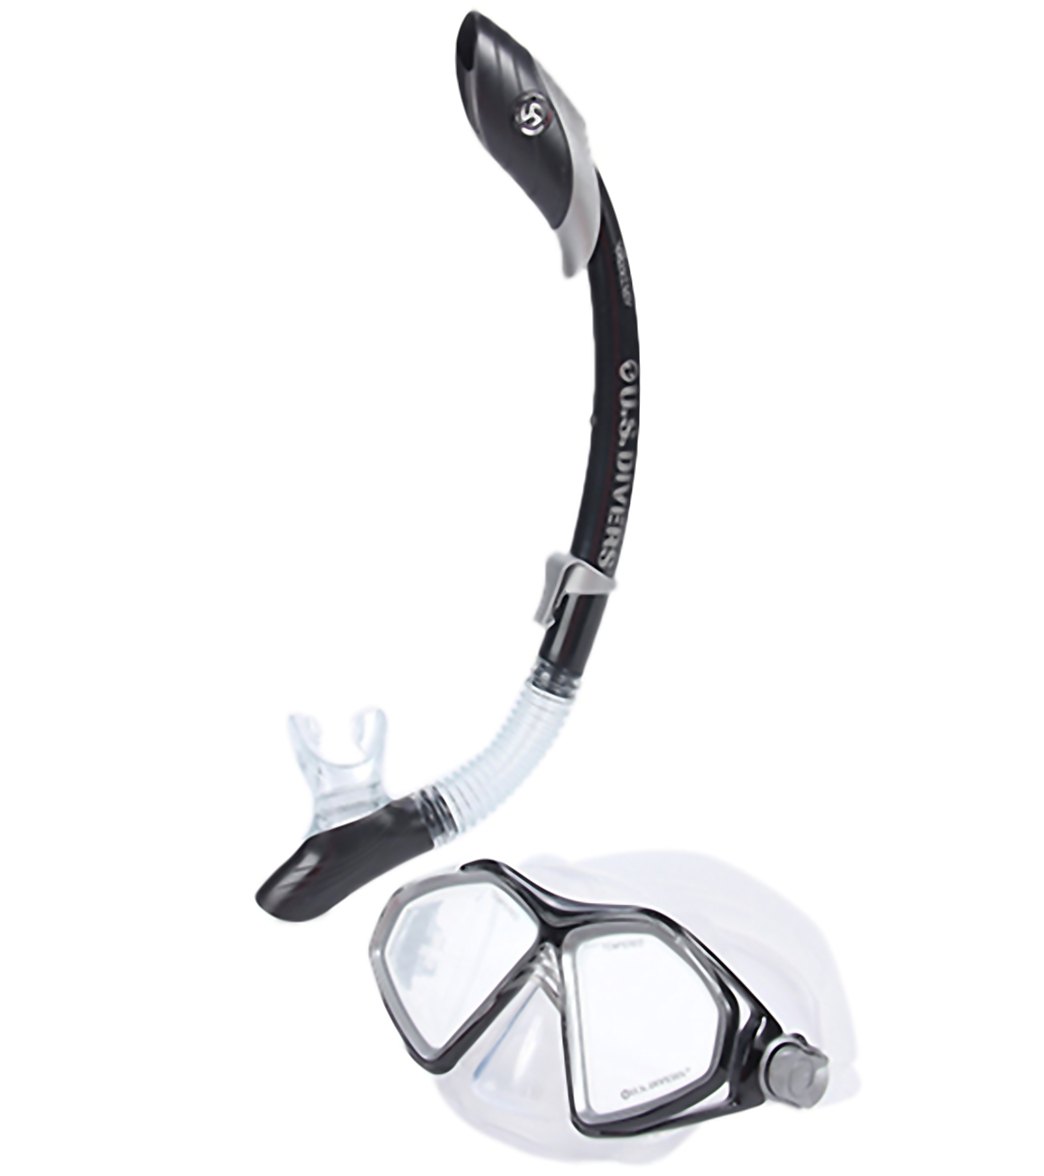 U.s. Divers Admiral 2Lx/Island Dry Mask And Snorkel Set - Black Silicone - Swimoutlet.com